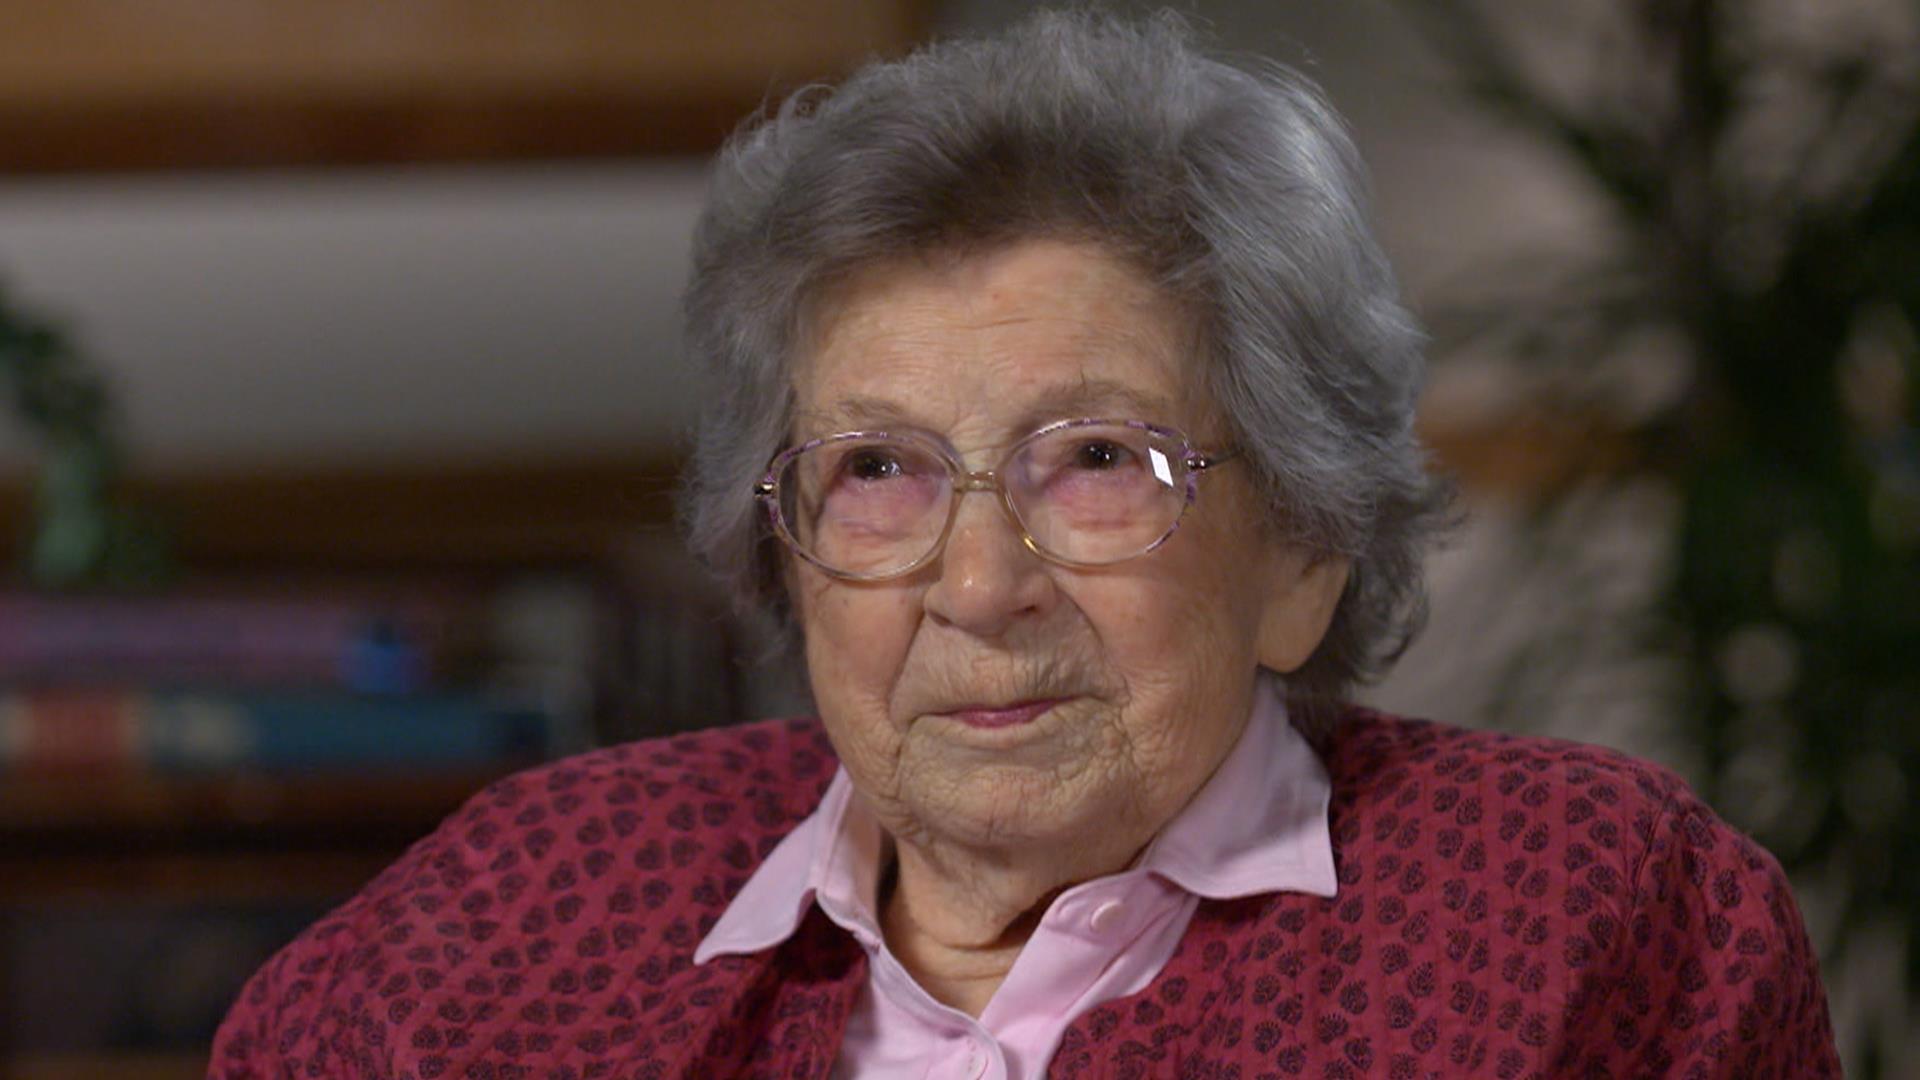 Children’s author Beverly Cleary on turning 100: ‘I didn't do it on purpose’